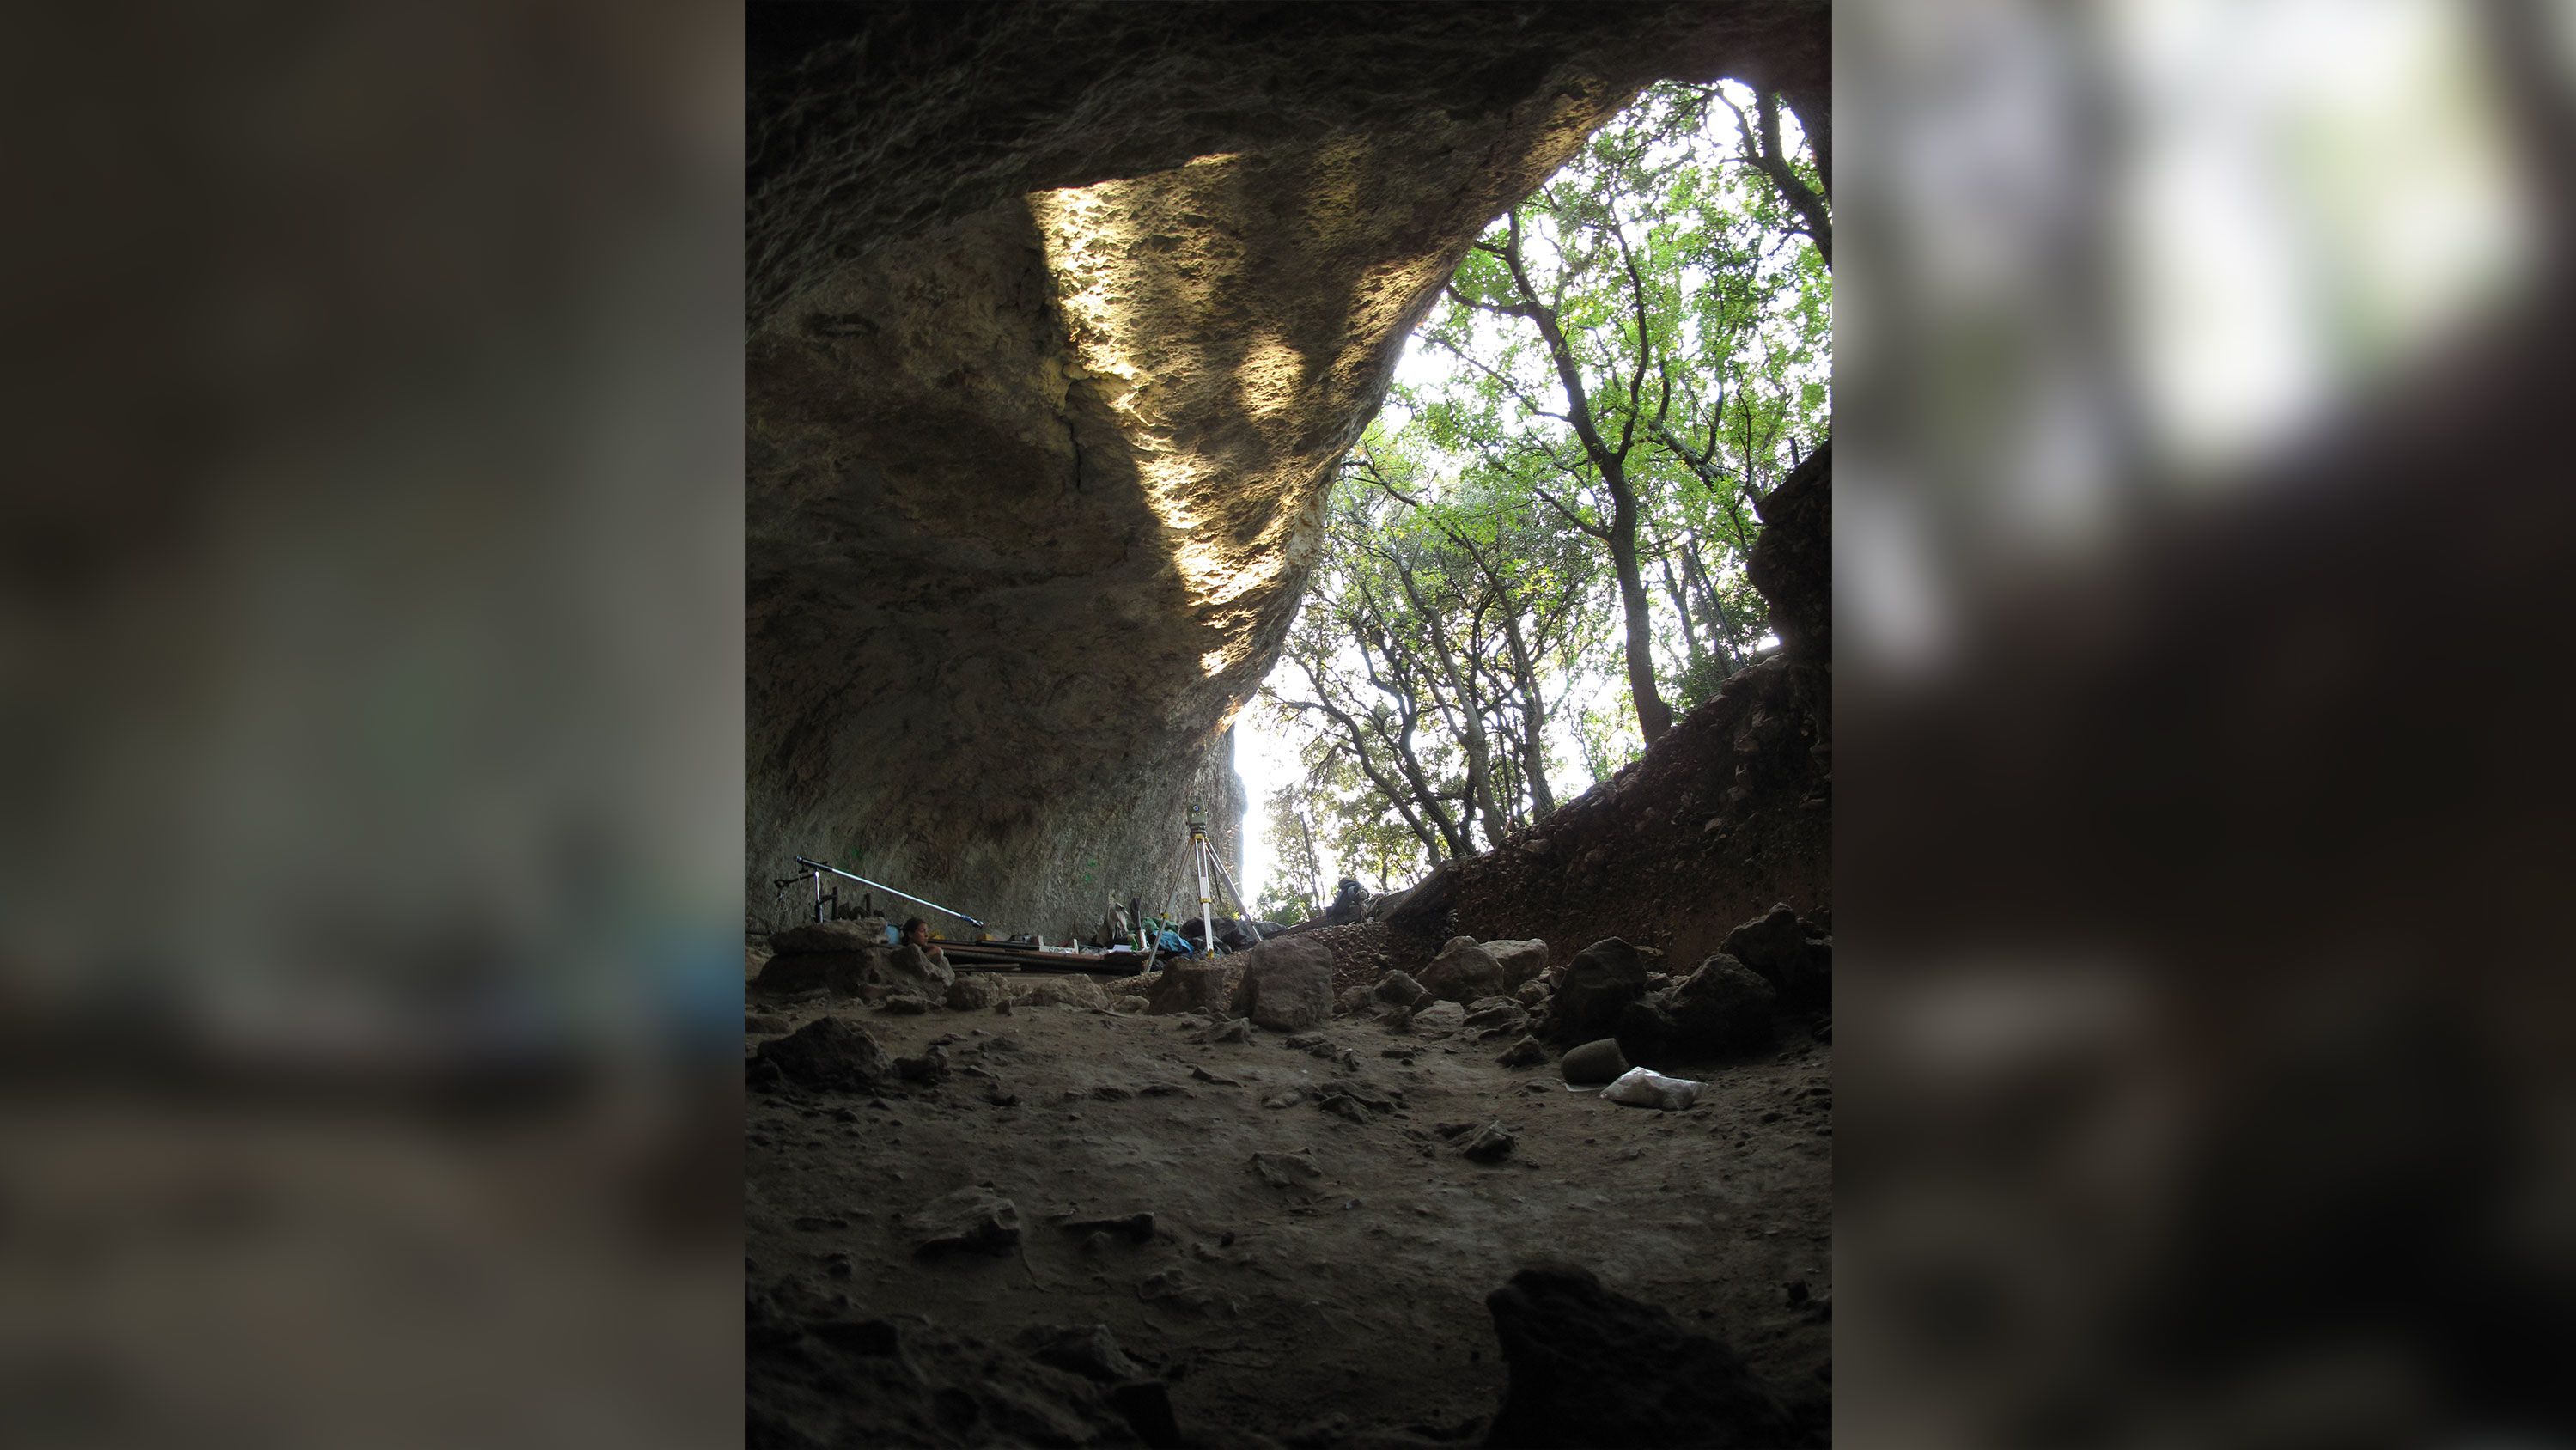 The excavation of Grotte Mandrin in France has revealed that early modern humans lived there some 54,000 years ago.